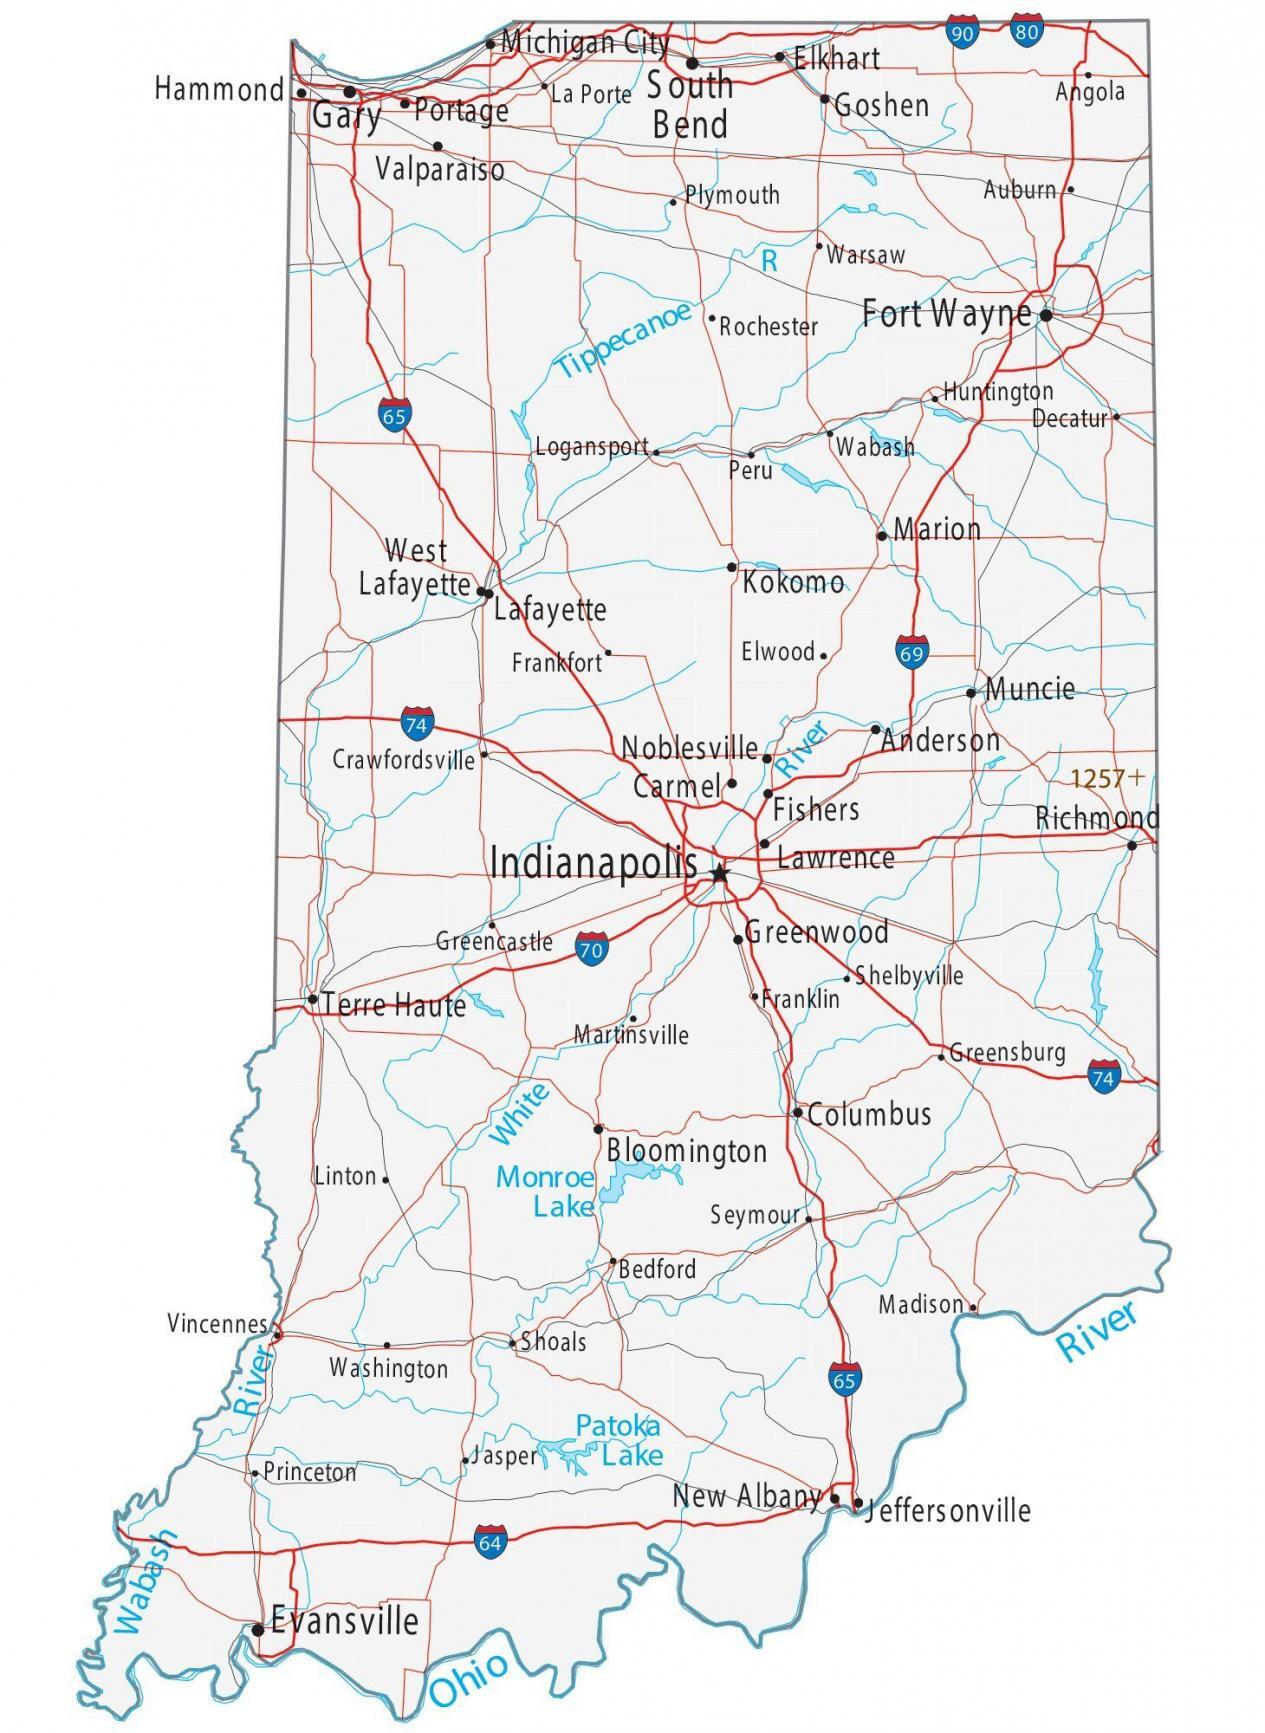 Map of Indiana - Cities and Roads - GIS Geography